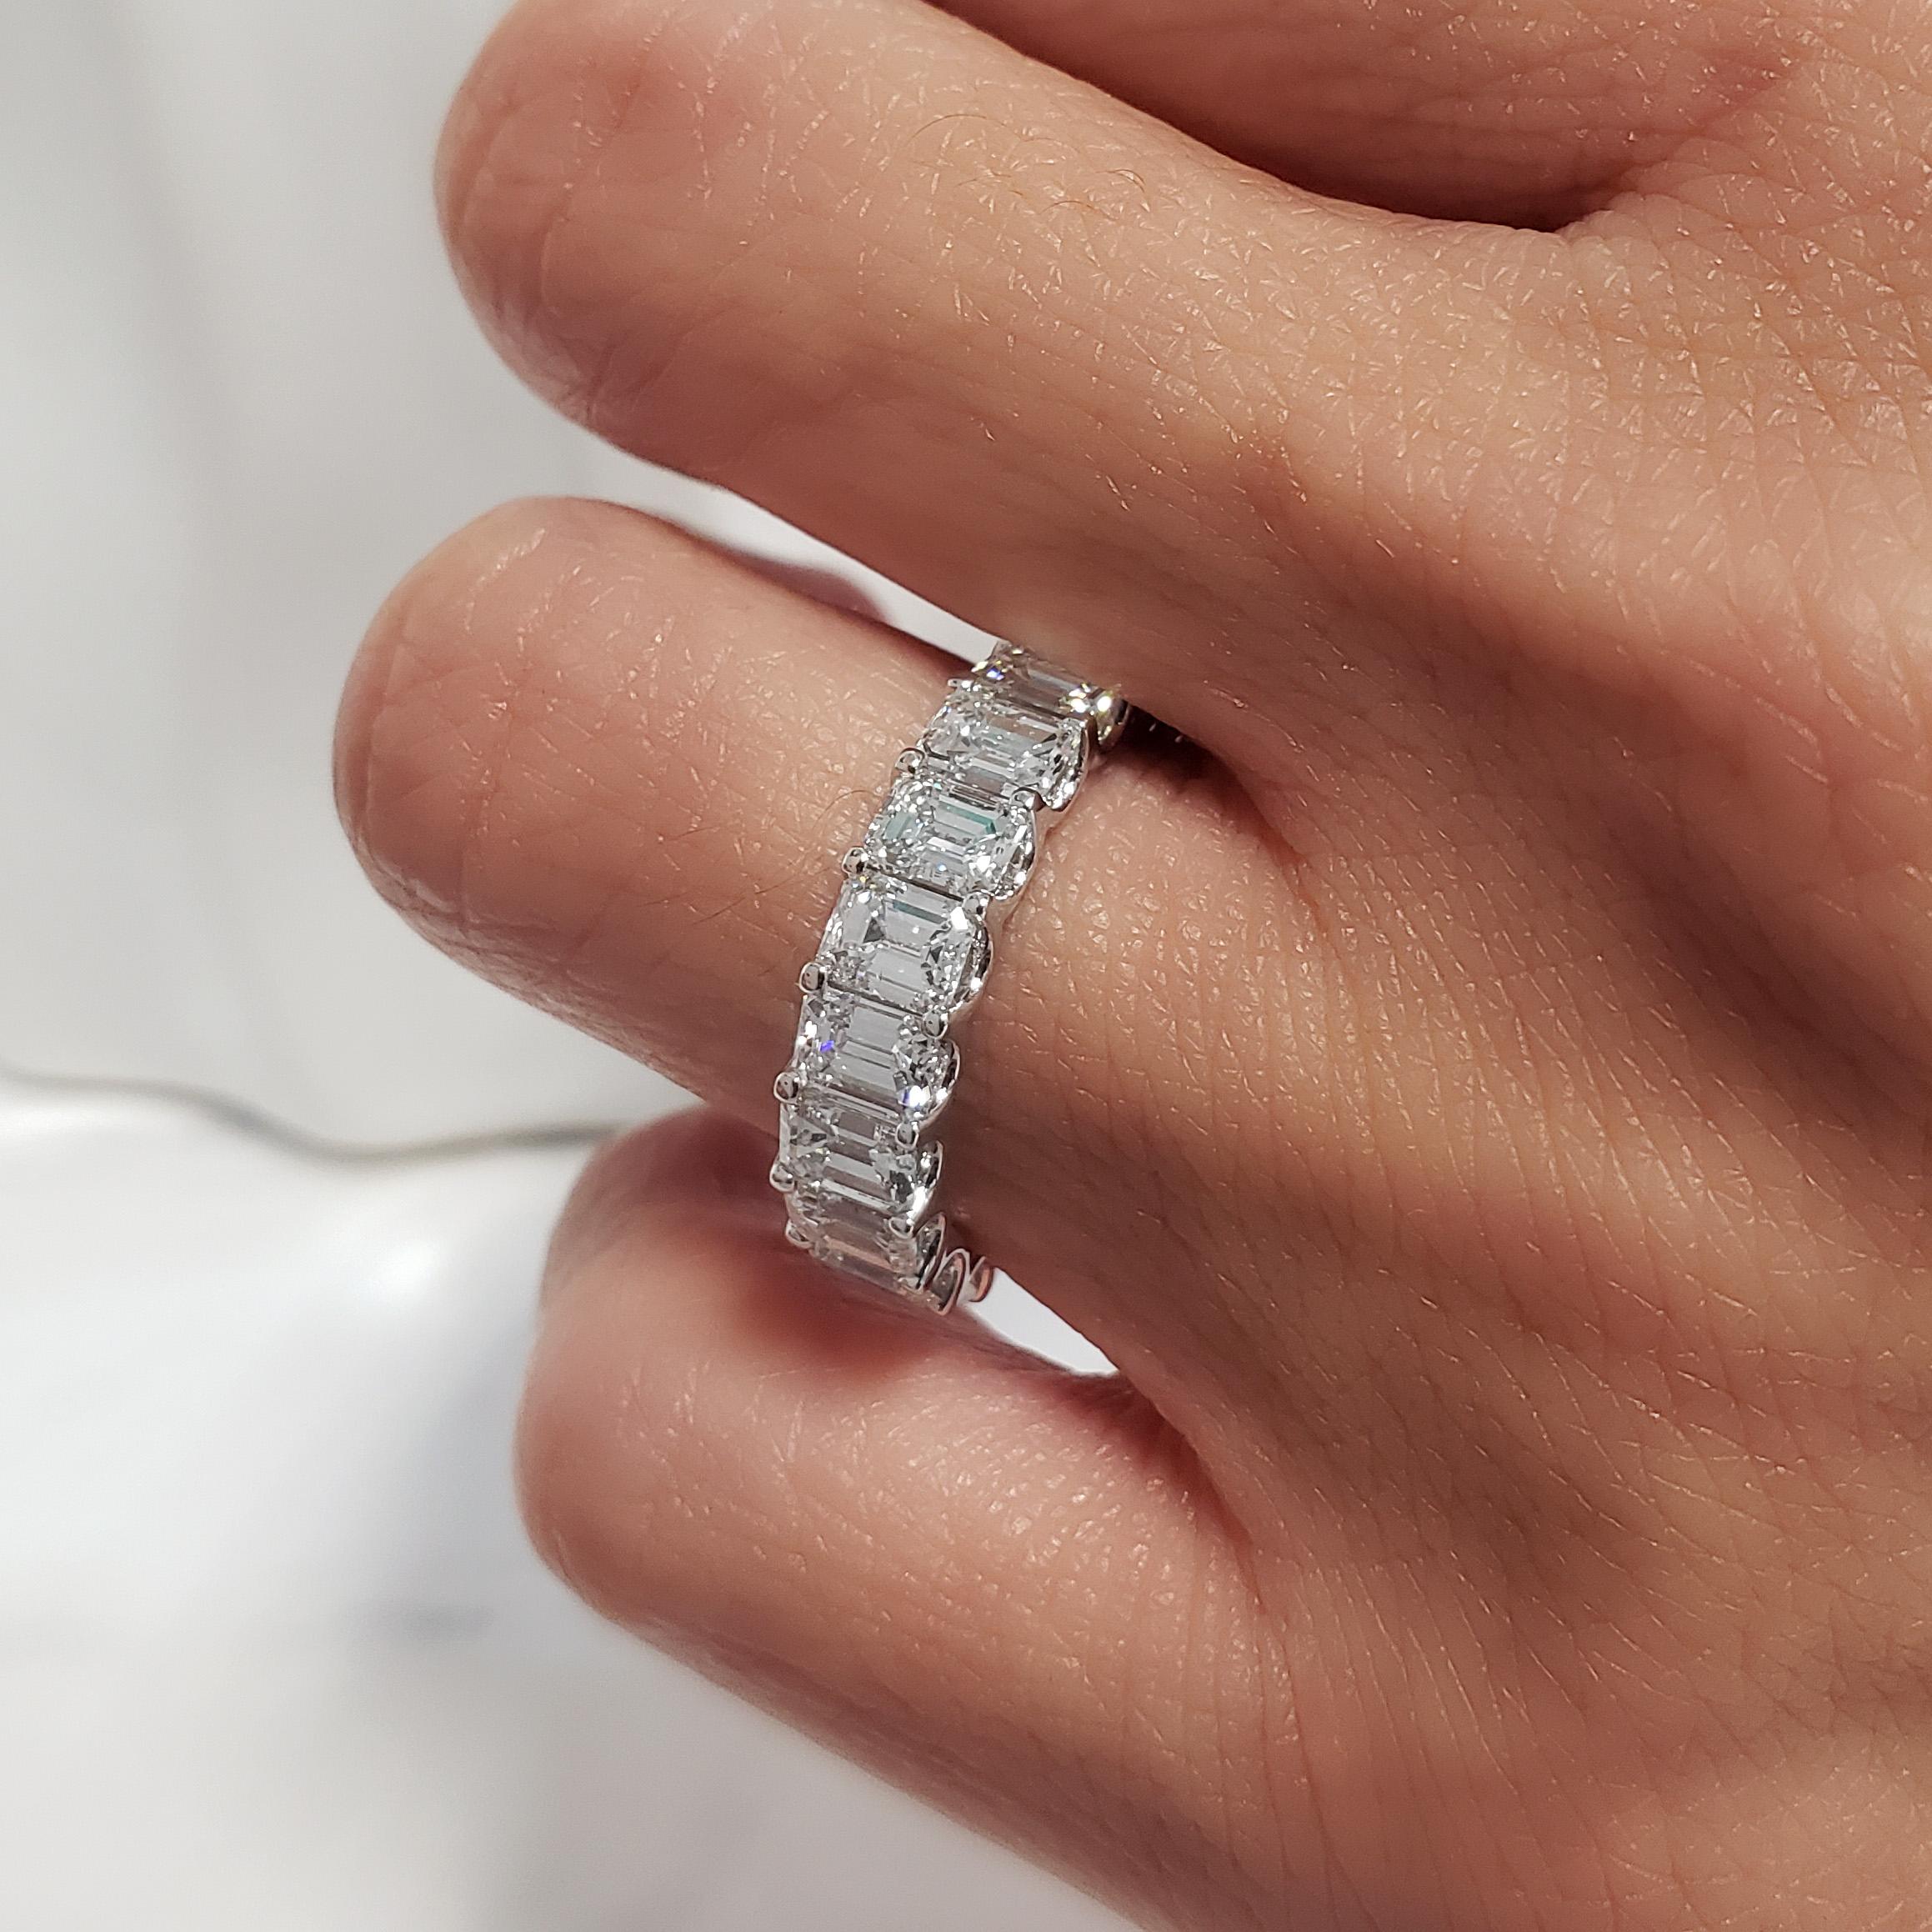 For Sale:  6 Carats Emerald Cut Eternity Band Shared Prongs F-G Color VS1 Clarity 18k Gold 8